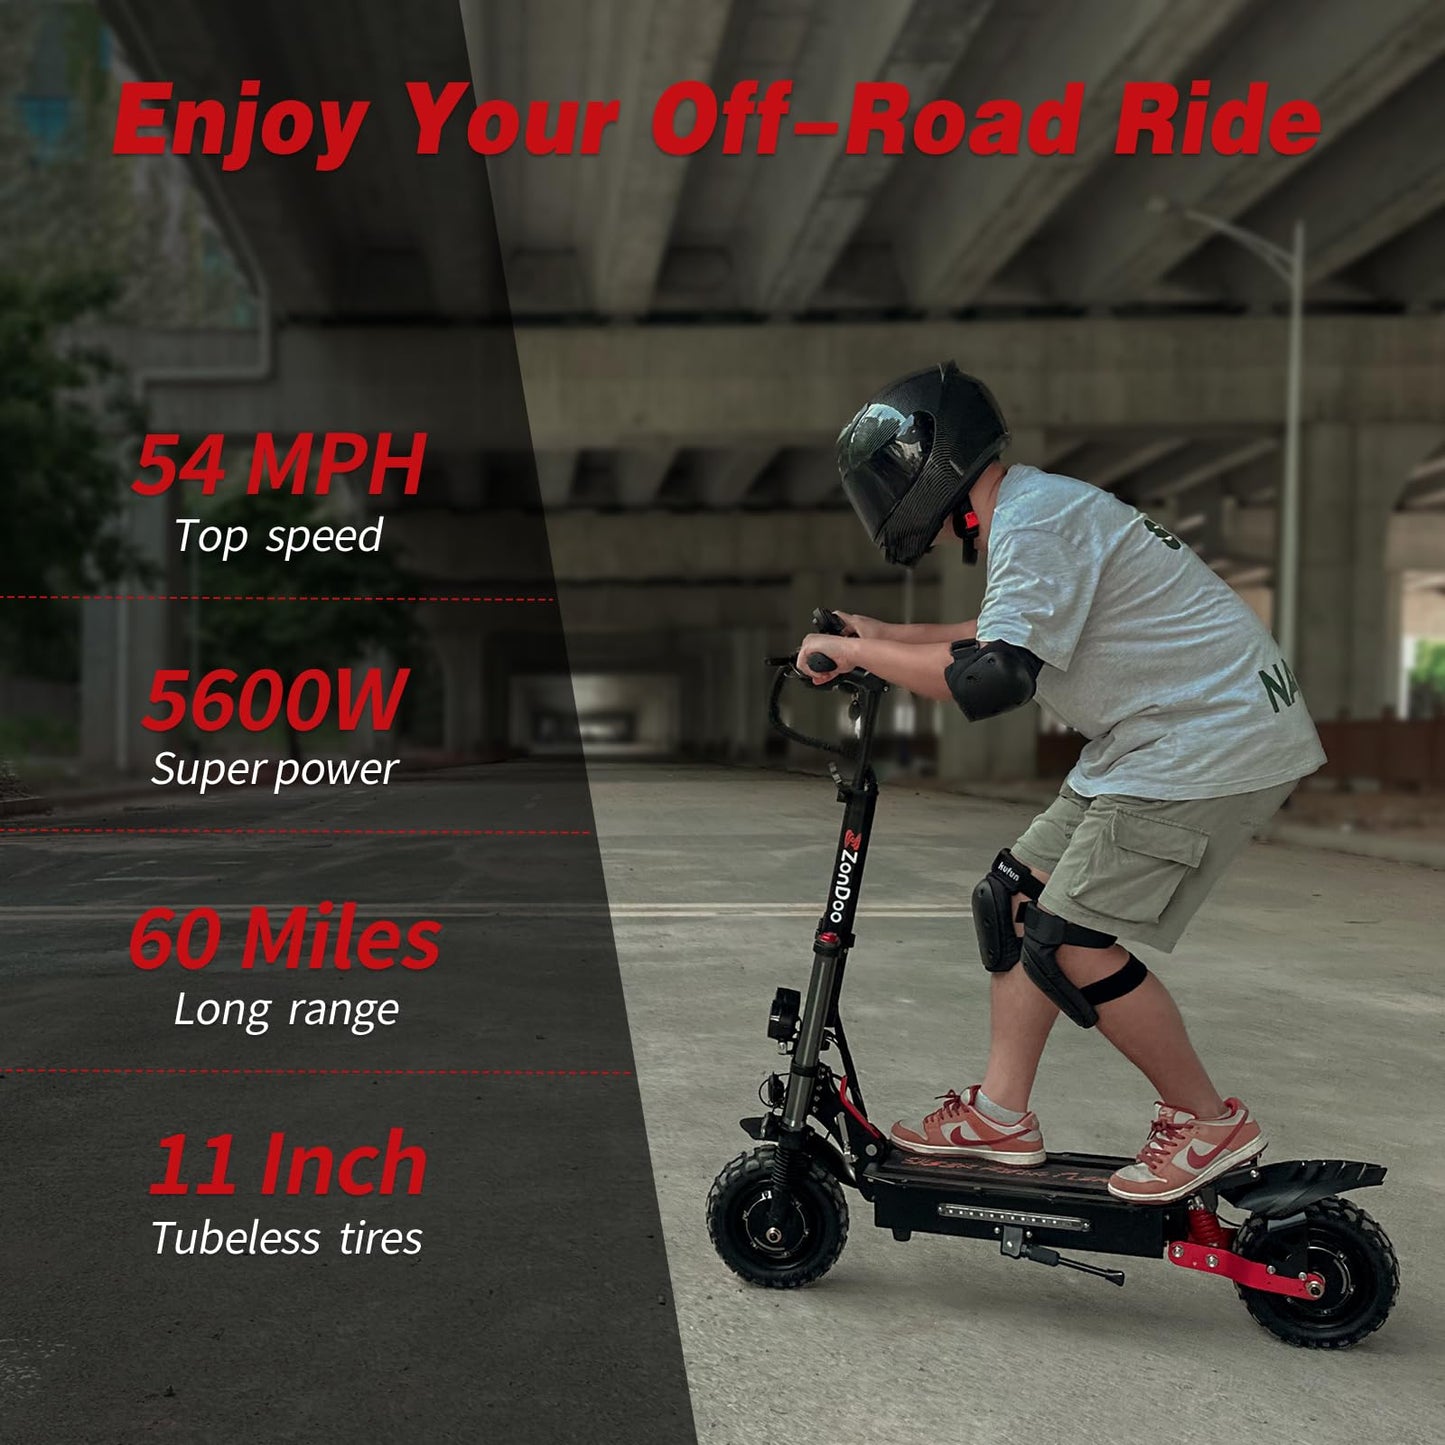 Adult Electric Scooter 50 MPH, 5600W Dual Motors 60 Miles Range, Hydraulic Suspensions and Dual Oil Brakes All Terrain ZonDoo ZO03 Scooter Electric with Seat for Heavy Adults